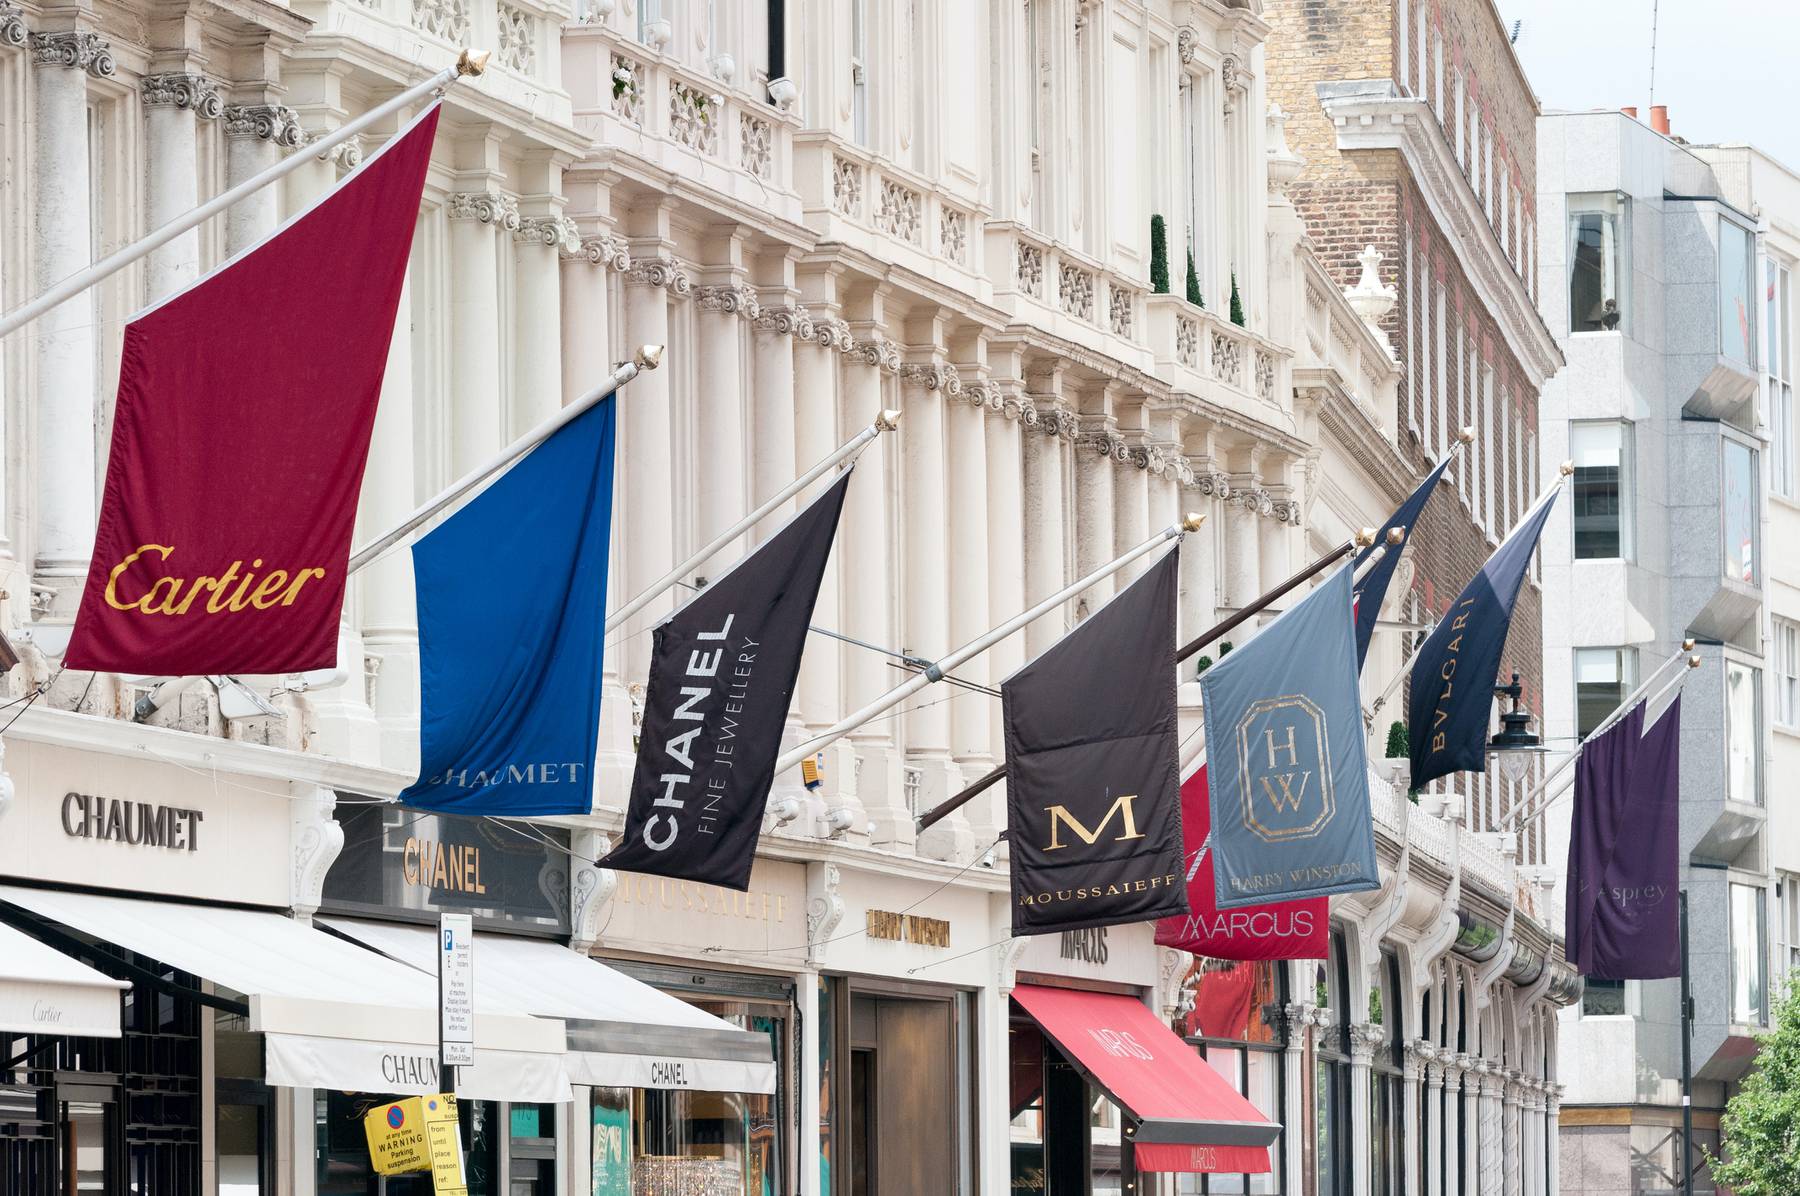 The exterior of luxury stores on Bond Street in London. Flags showing brands including Cartier and Chanel are above the store entrances.